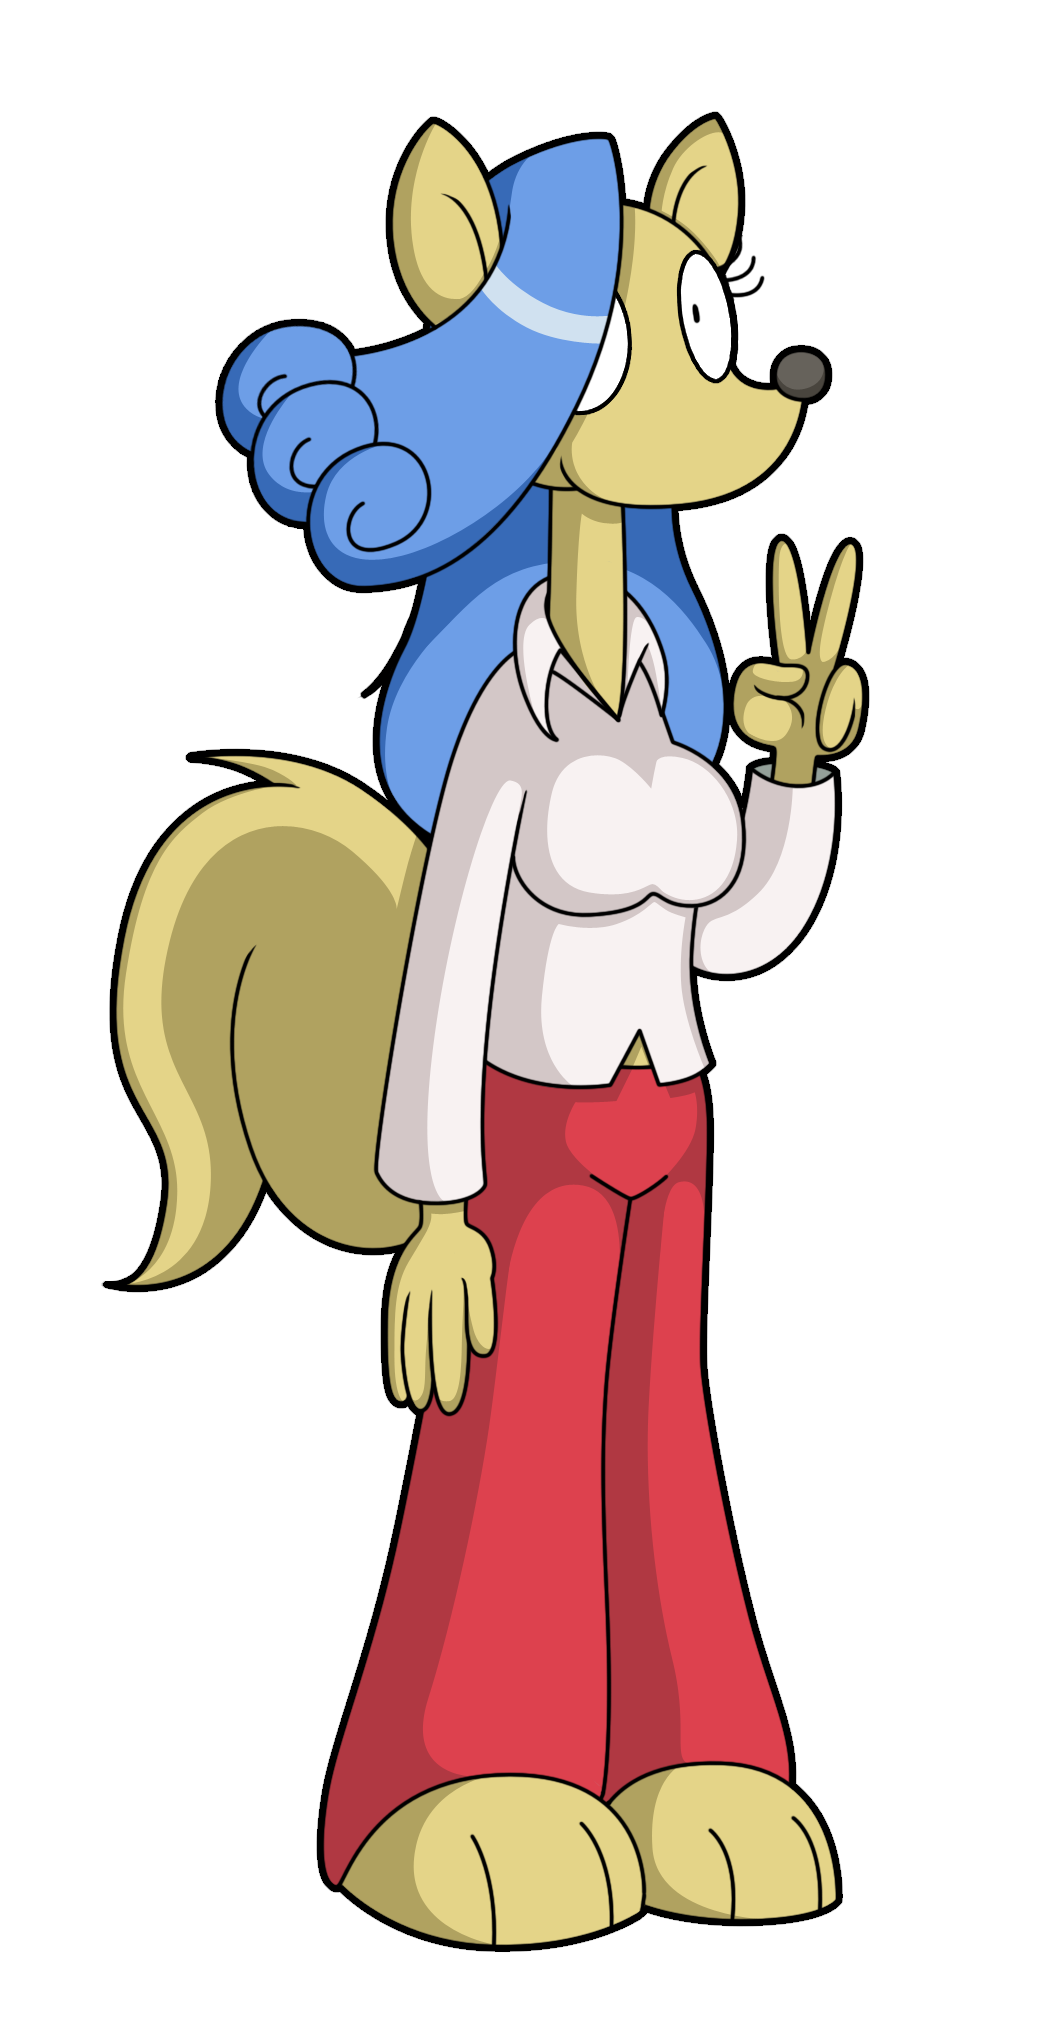 &lt;3 barefoot blue_hair breasts casandra cute female fur hair hands invalid_tag looking_at_viewer paws red_pants rockmanzxadvent rocko's_modern_life rocko's_modern_life solo strange_hair white_shirt